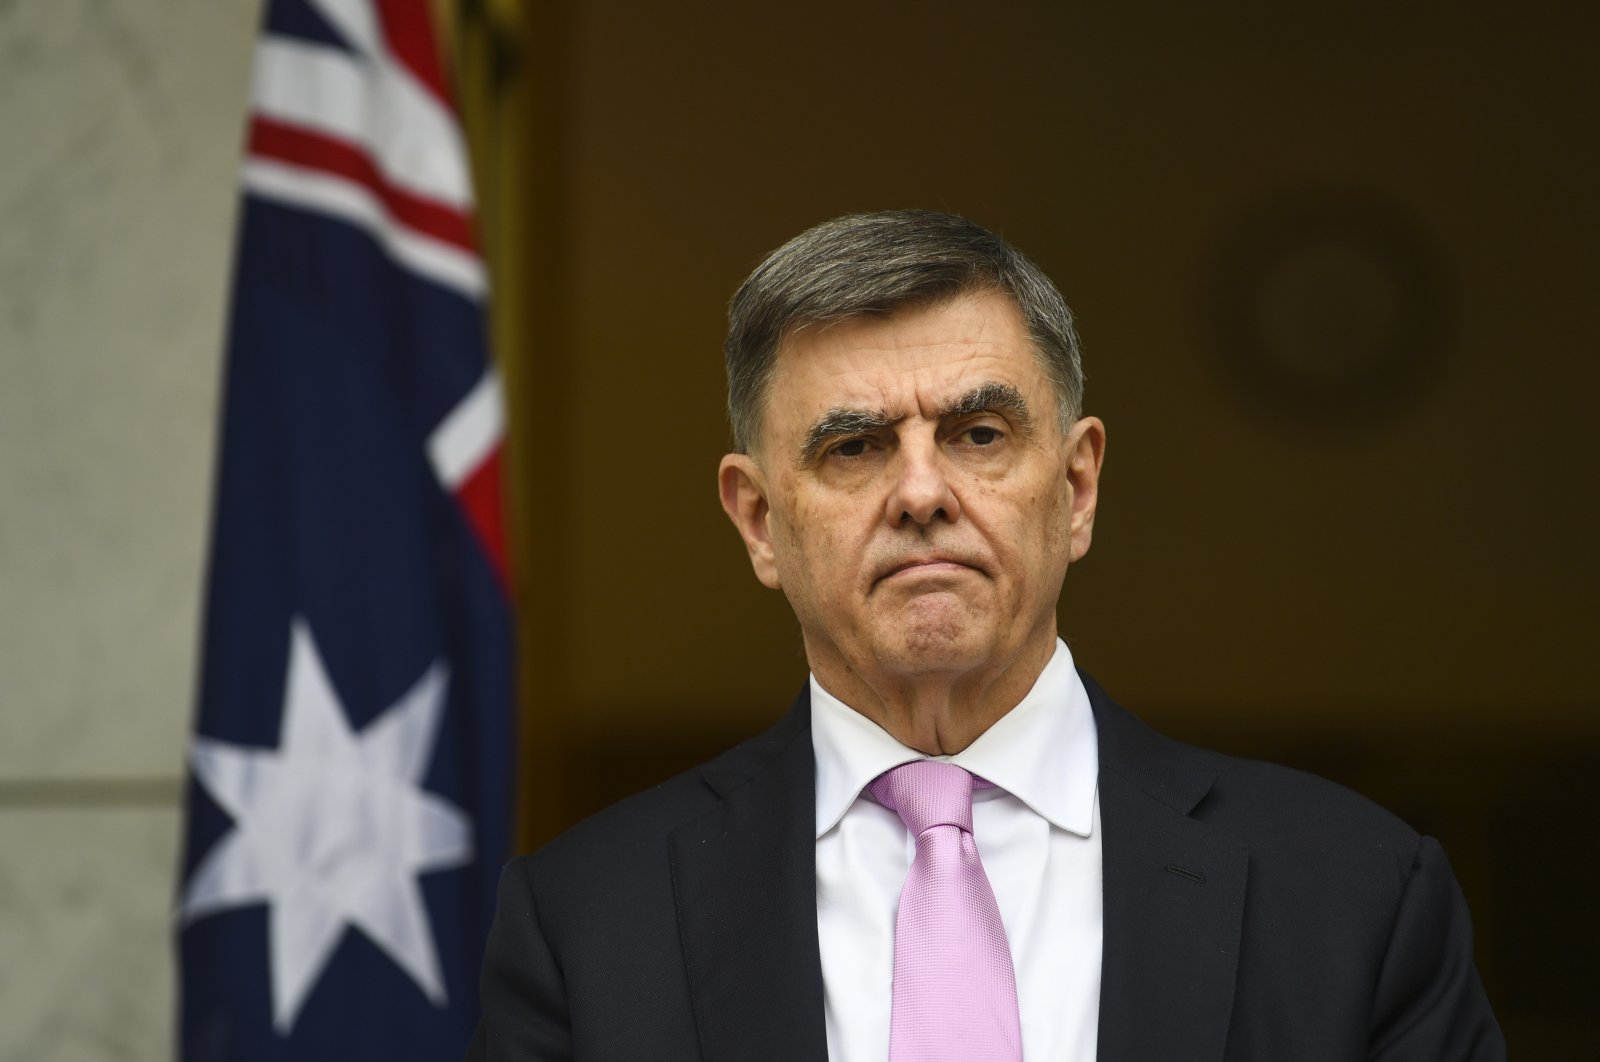 Australia's Chief Medical Officer Brendan Murphy attends a press conference at Parliament House in Canberra, Australia, 03 April 2020. (EPA Photo)